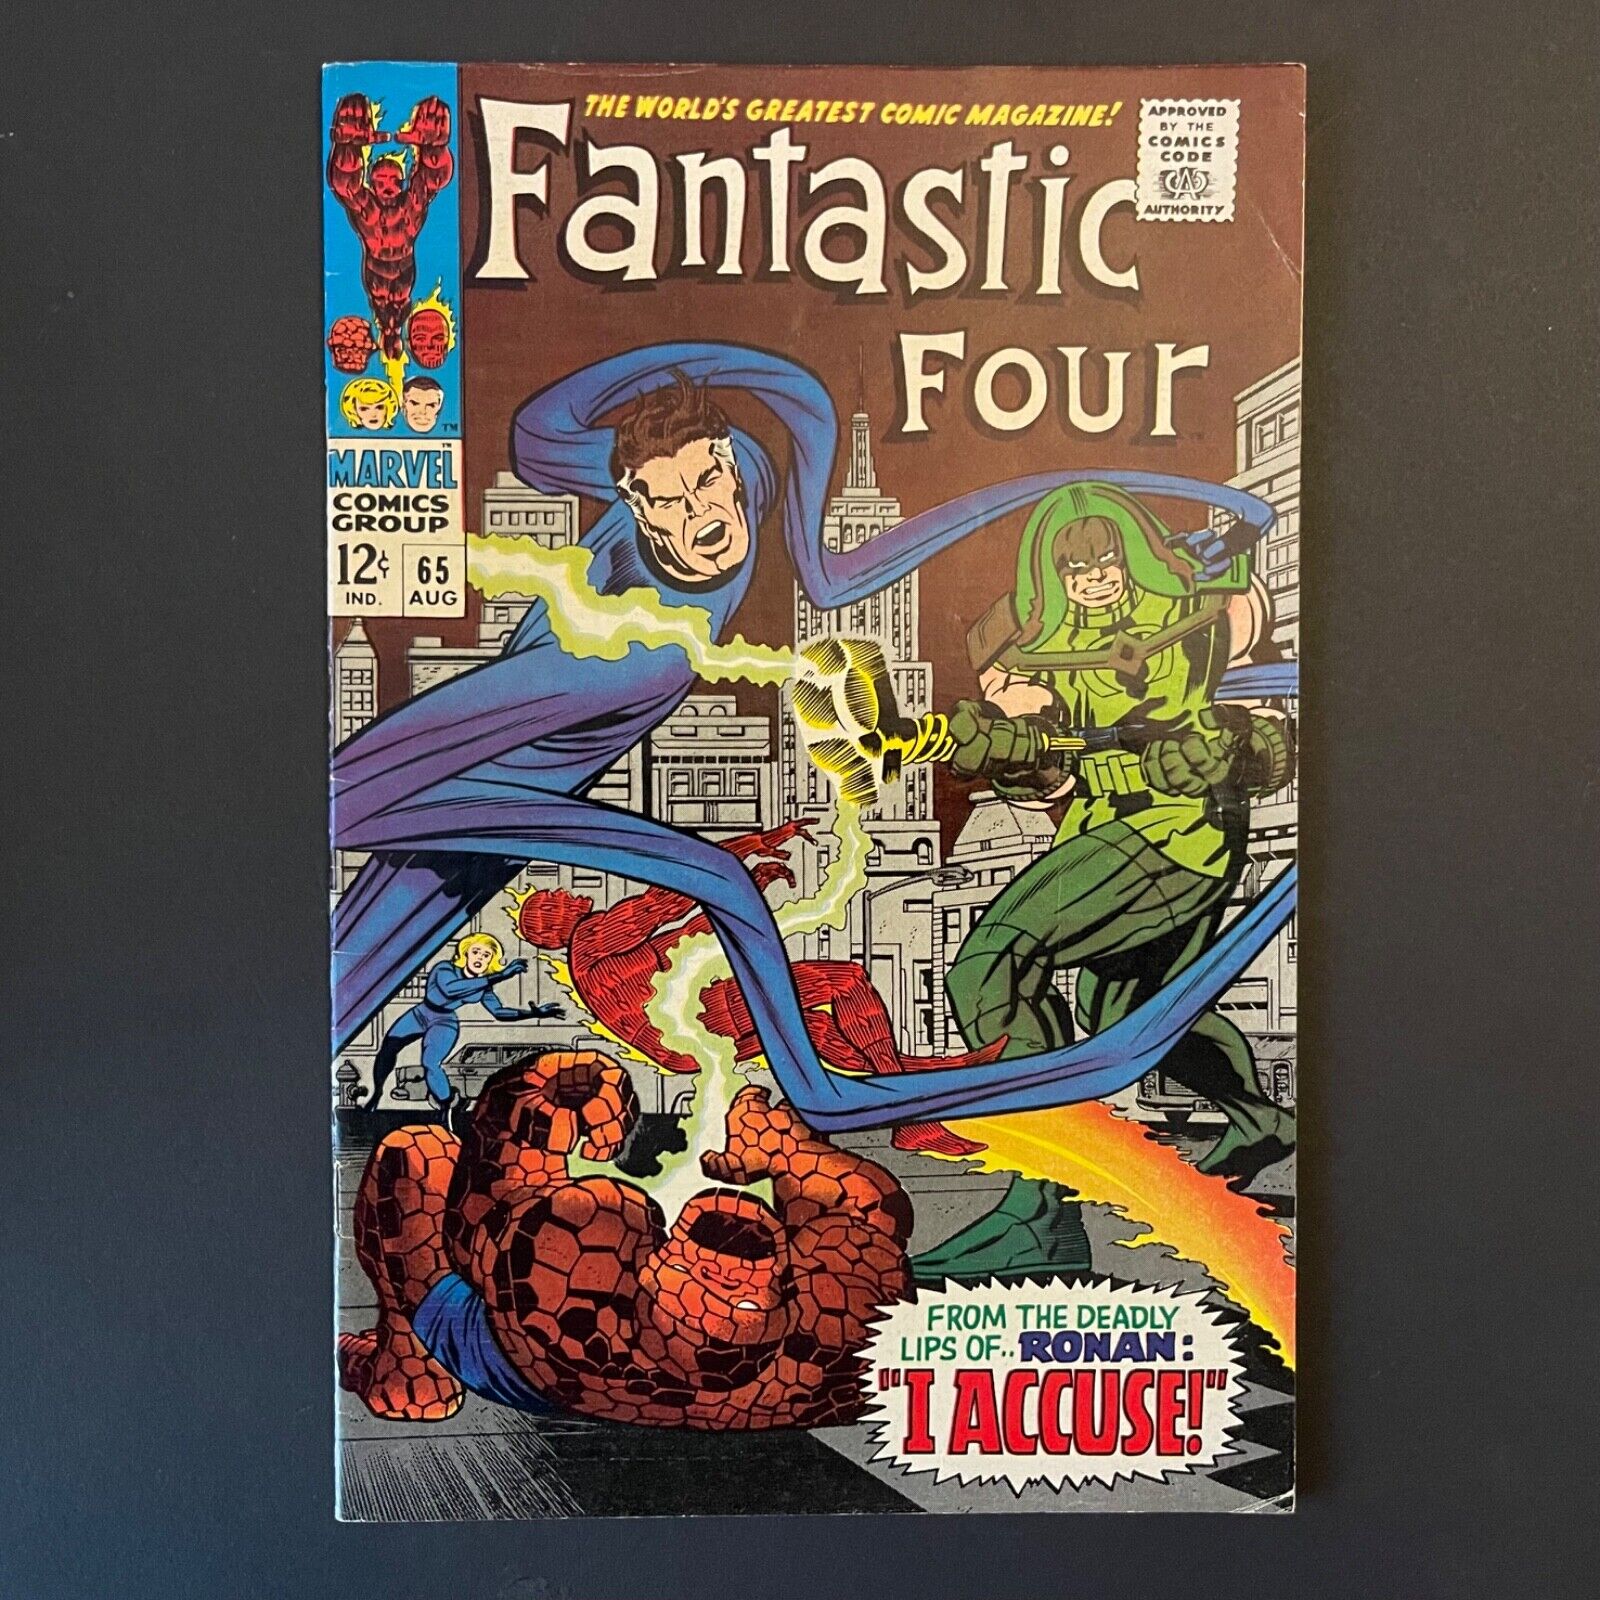 FANTASTIC FOUR #65 MARVEL COMICS 1967 1ST APPEARANCE OF RONAN THE ACCUSER NICE